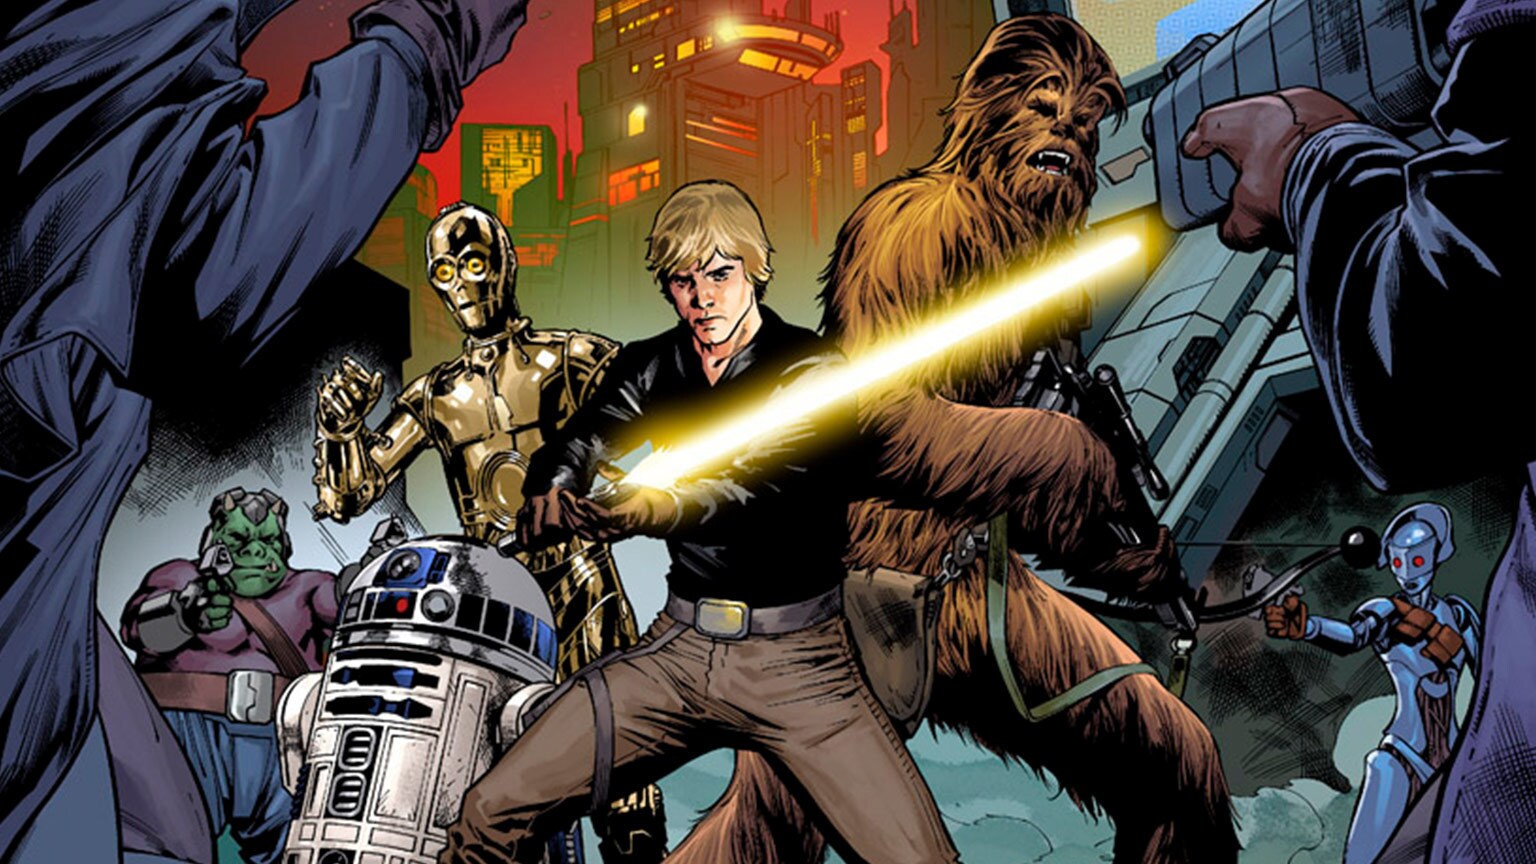 Luke Skywalker Joins the Search for Solo in Marvel’s Star Wars #13 - Exclusive Preview